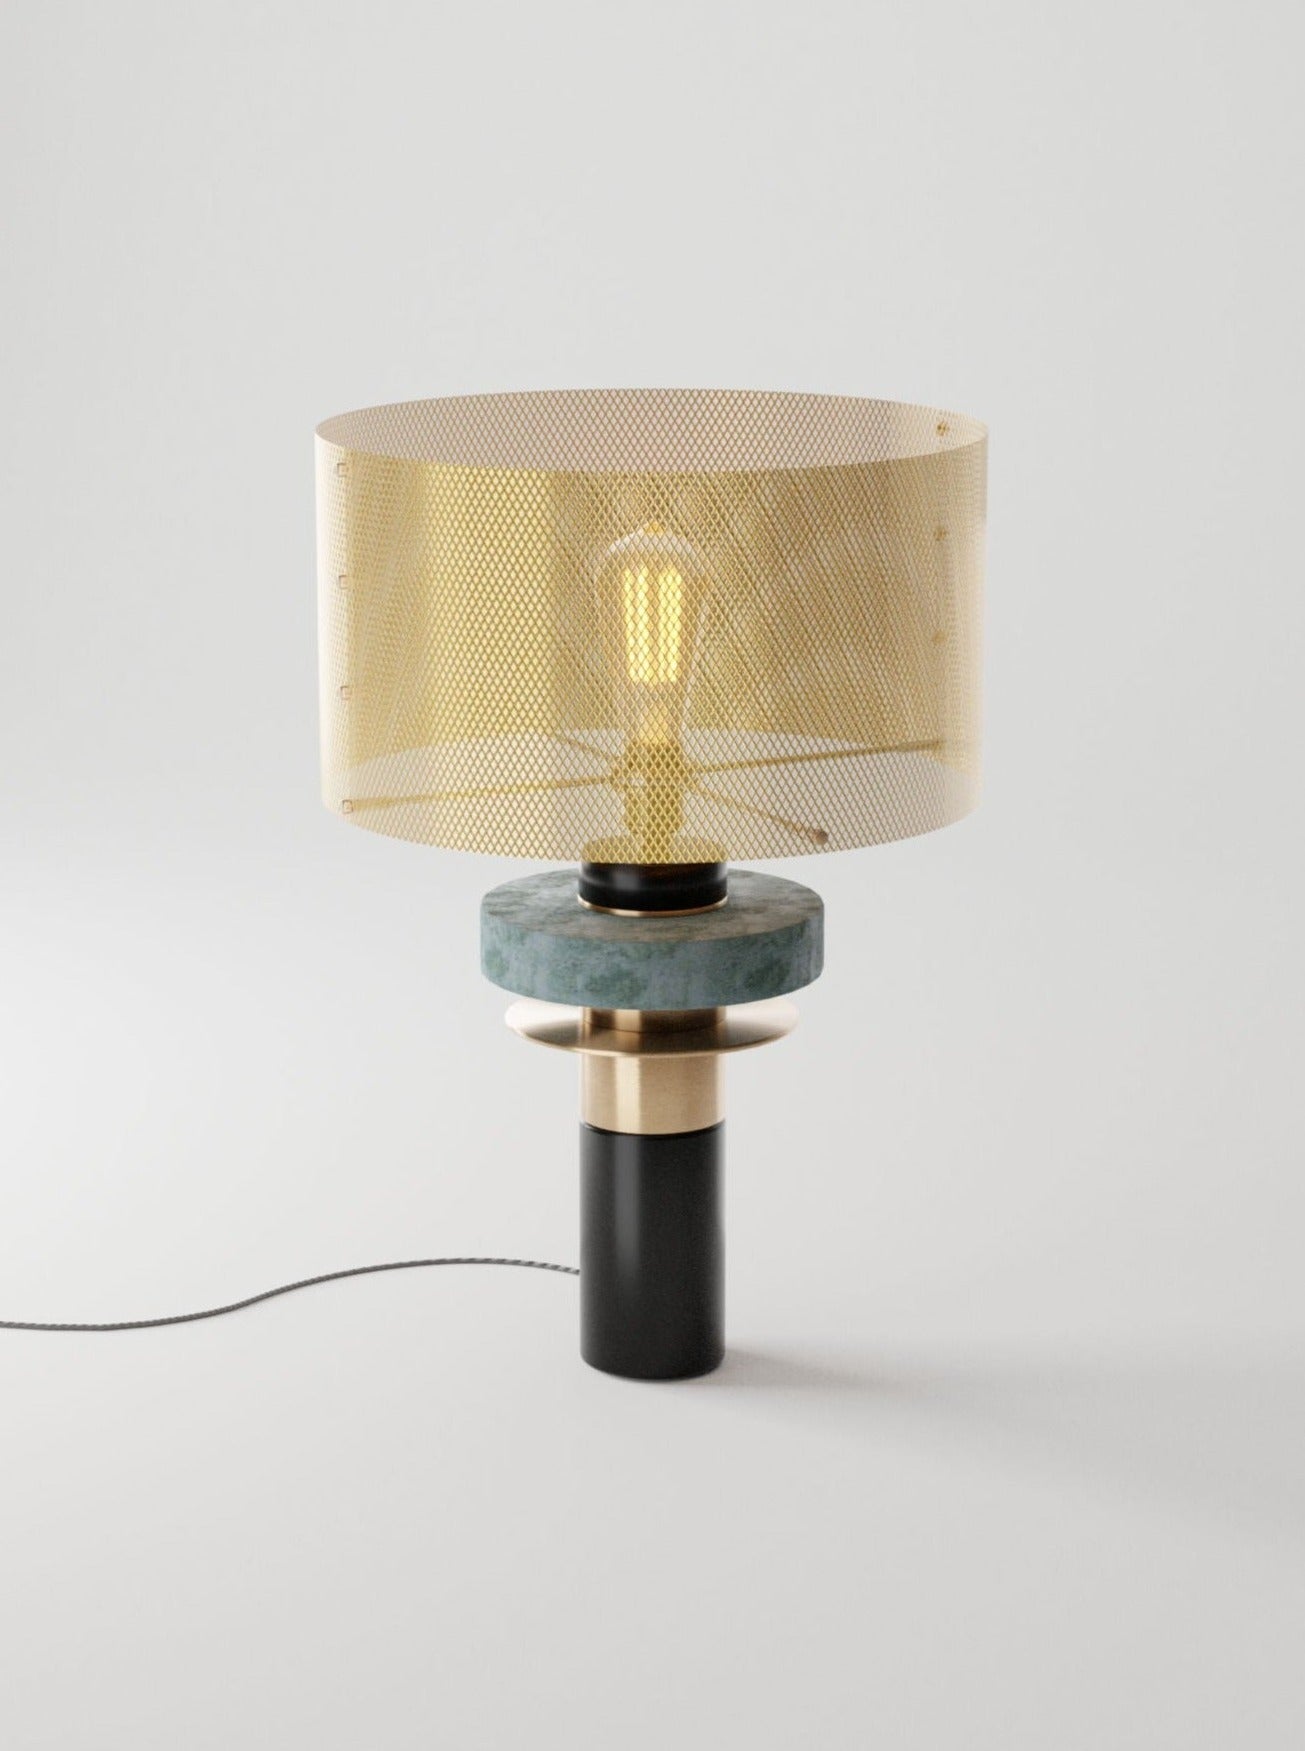 A modern Dyane table lamp by Marine Breynaert featuring a layered base with marble, wood, and solid brass elements, topped by a cylindrical translucent shade with a visible filament bulb.